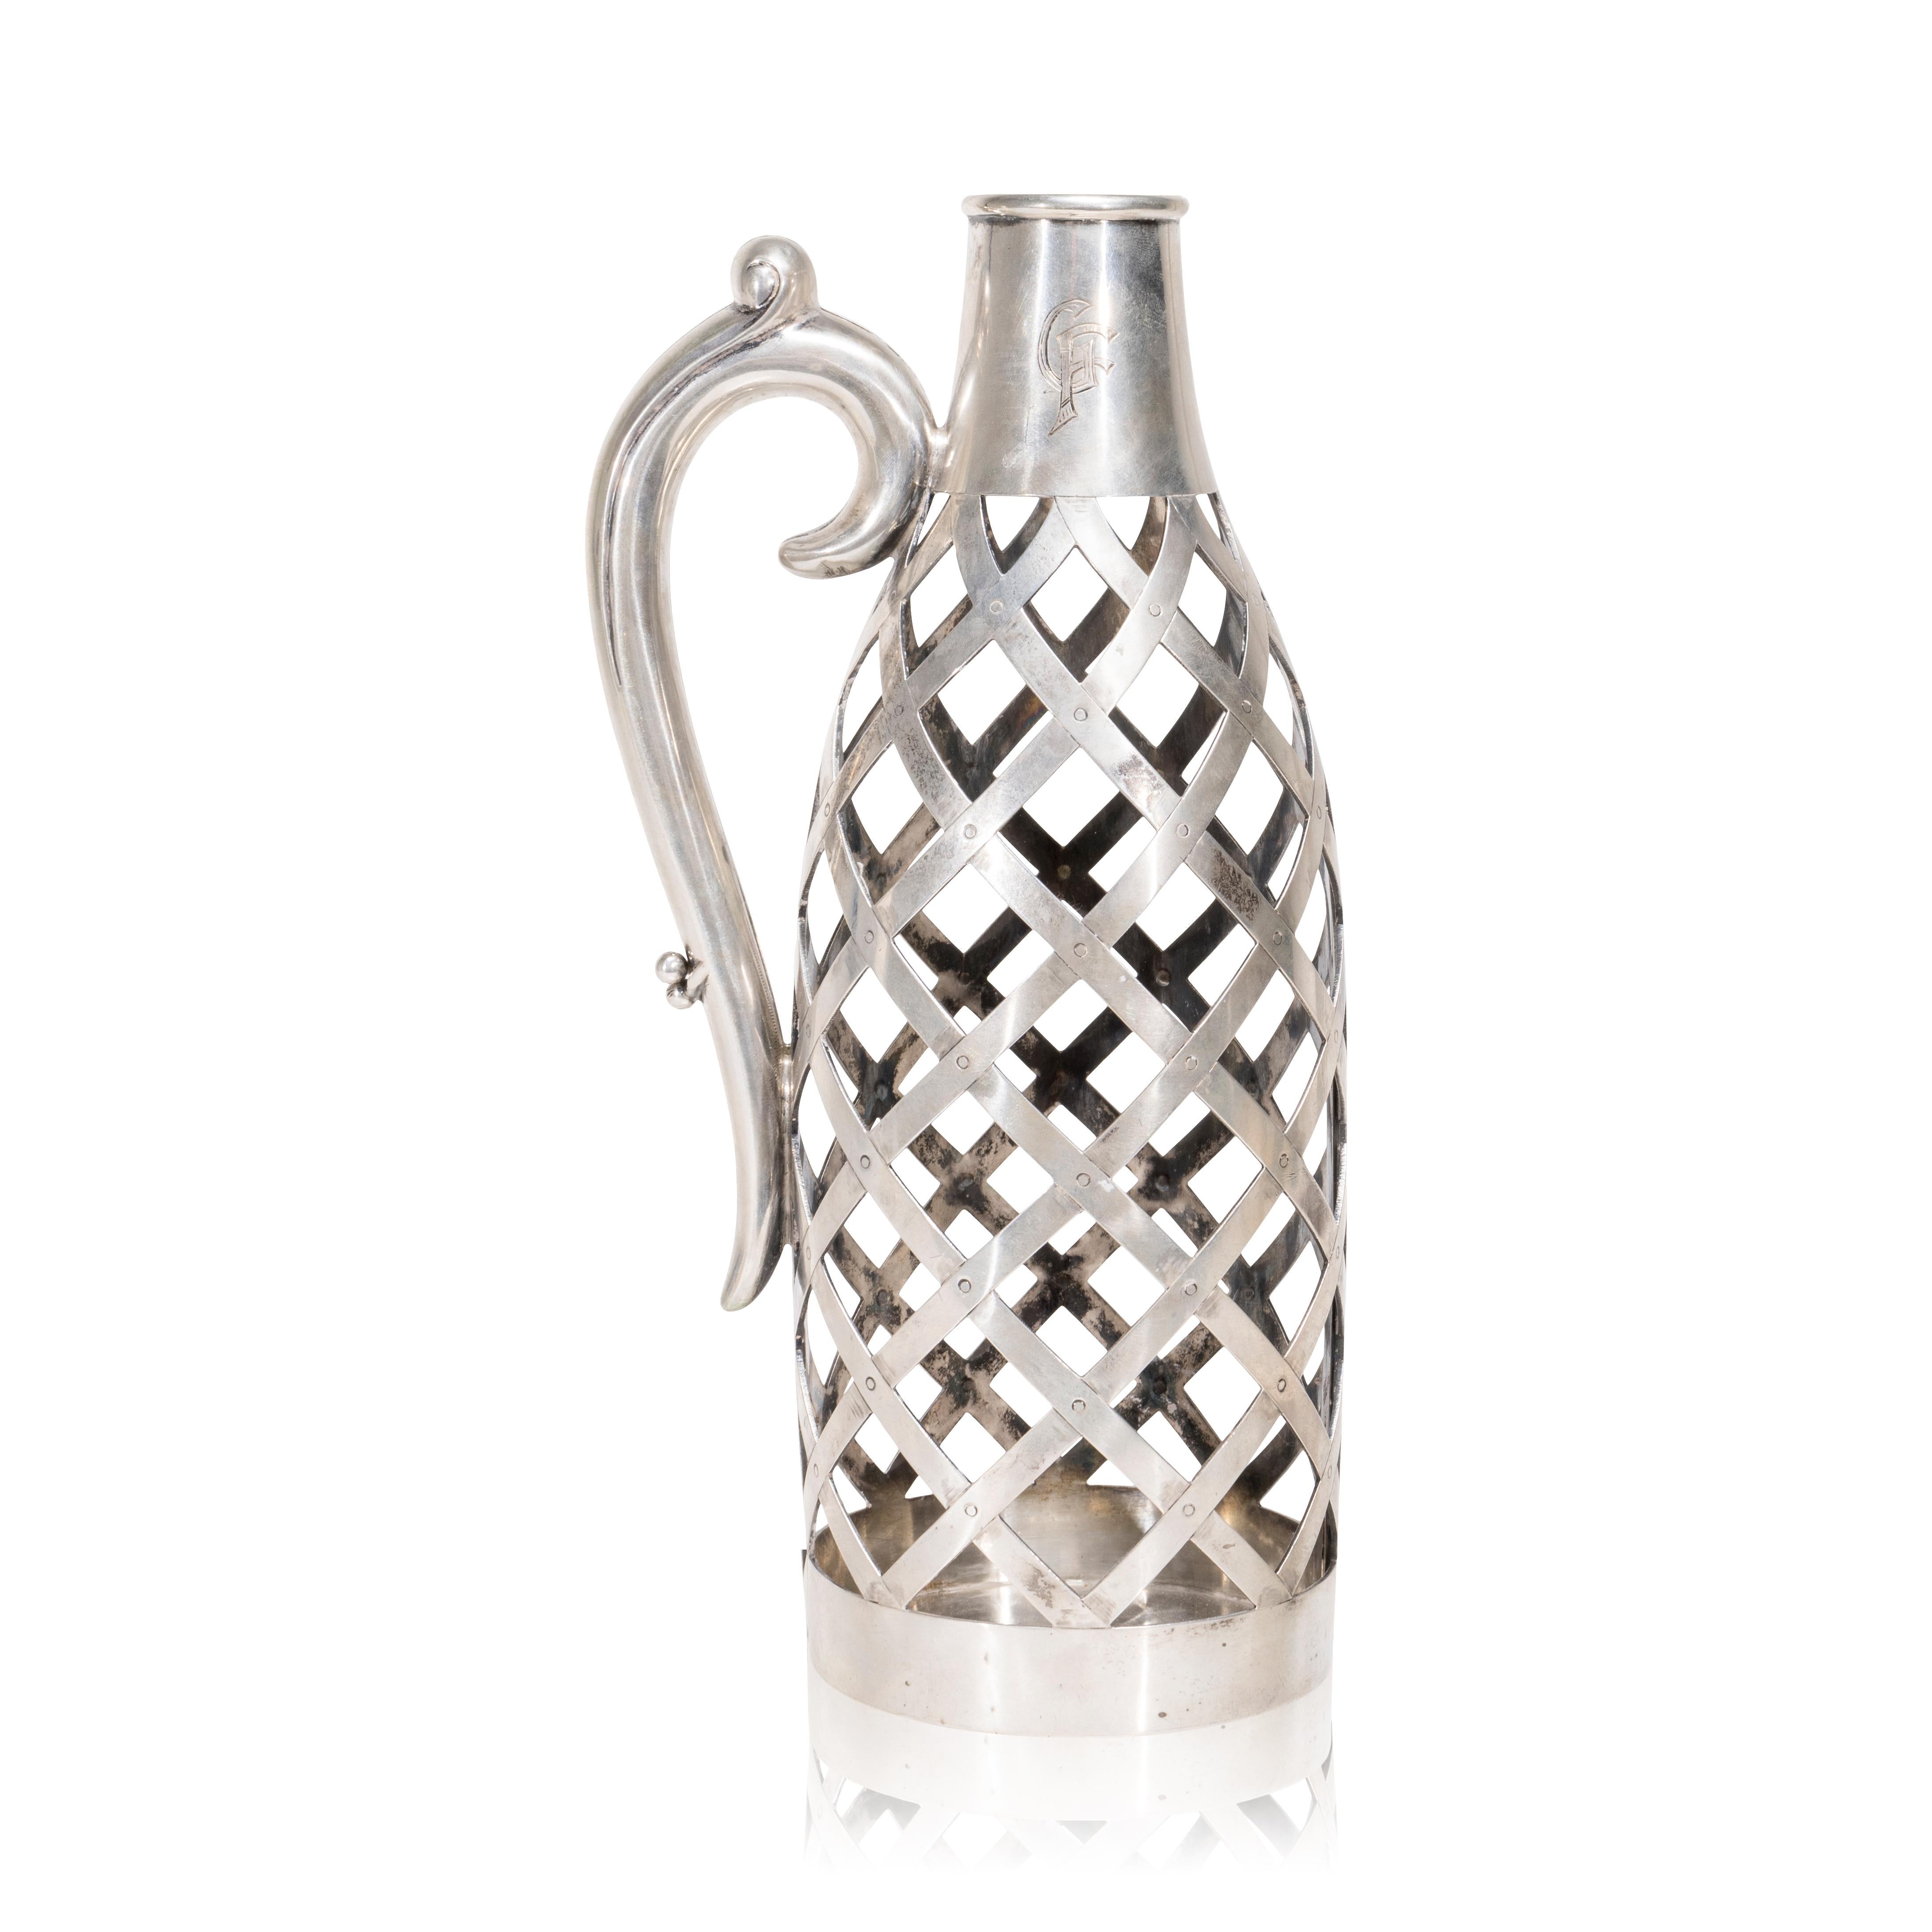 19th Century sterling silver wine bottle holder. German .800 silver wine bottle holder. Berlin, late 19th Century, H. Meyen & Co. Woven body with hinge opposite to handle. Monogrammed. 10 3/4